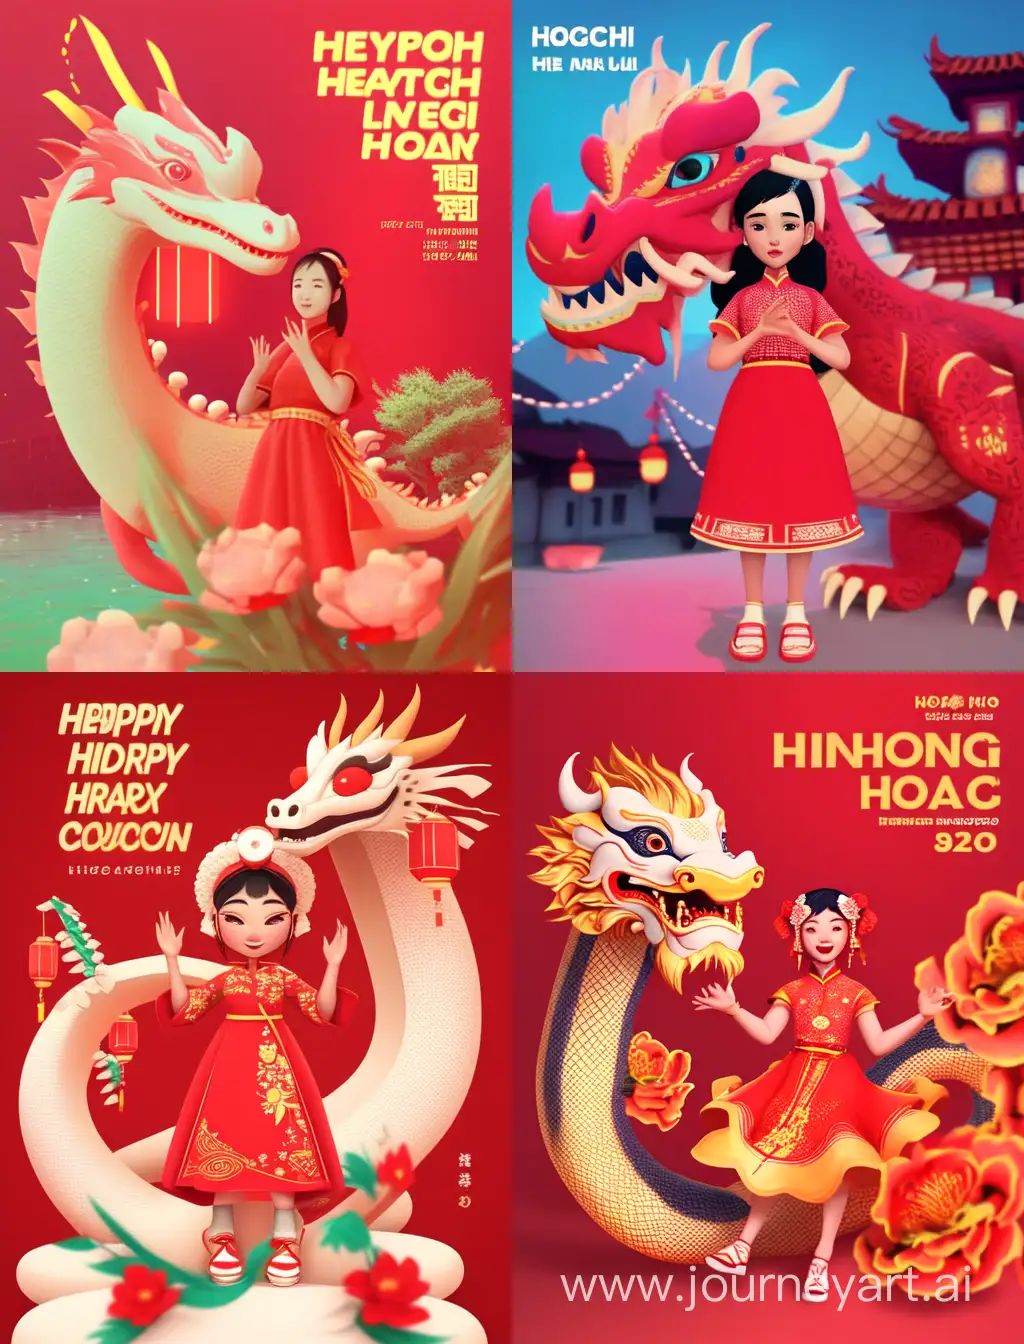 Asian-Girl-in-Red-Lunar-New-Year-Dress-with-Dragon-and-Westlake-Hanoi